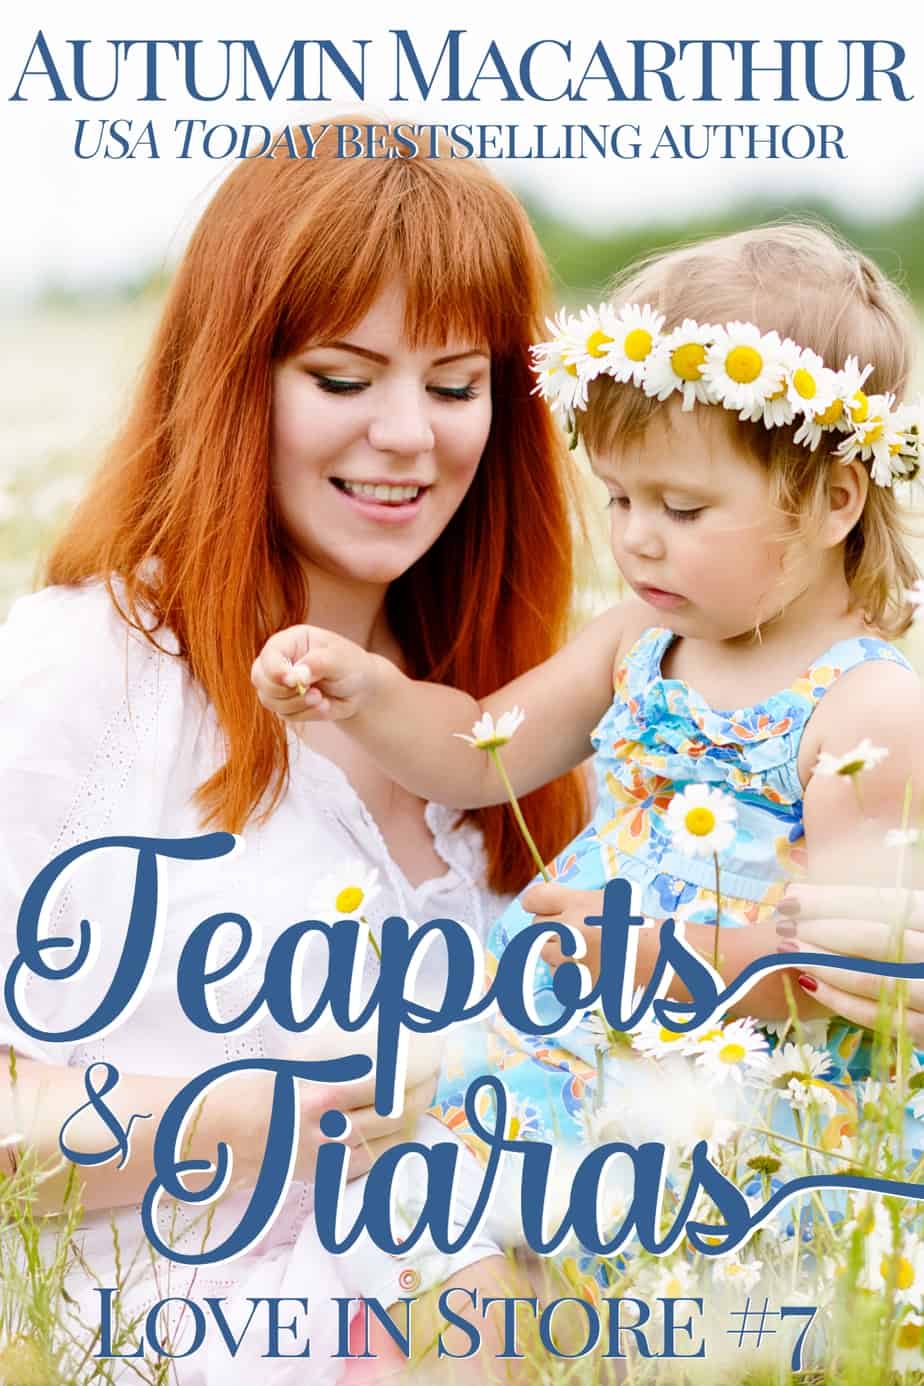 Cover image for London summer sweet inspirational romance Teapots and Tiaras by Autumn Macarthur